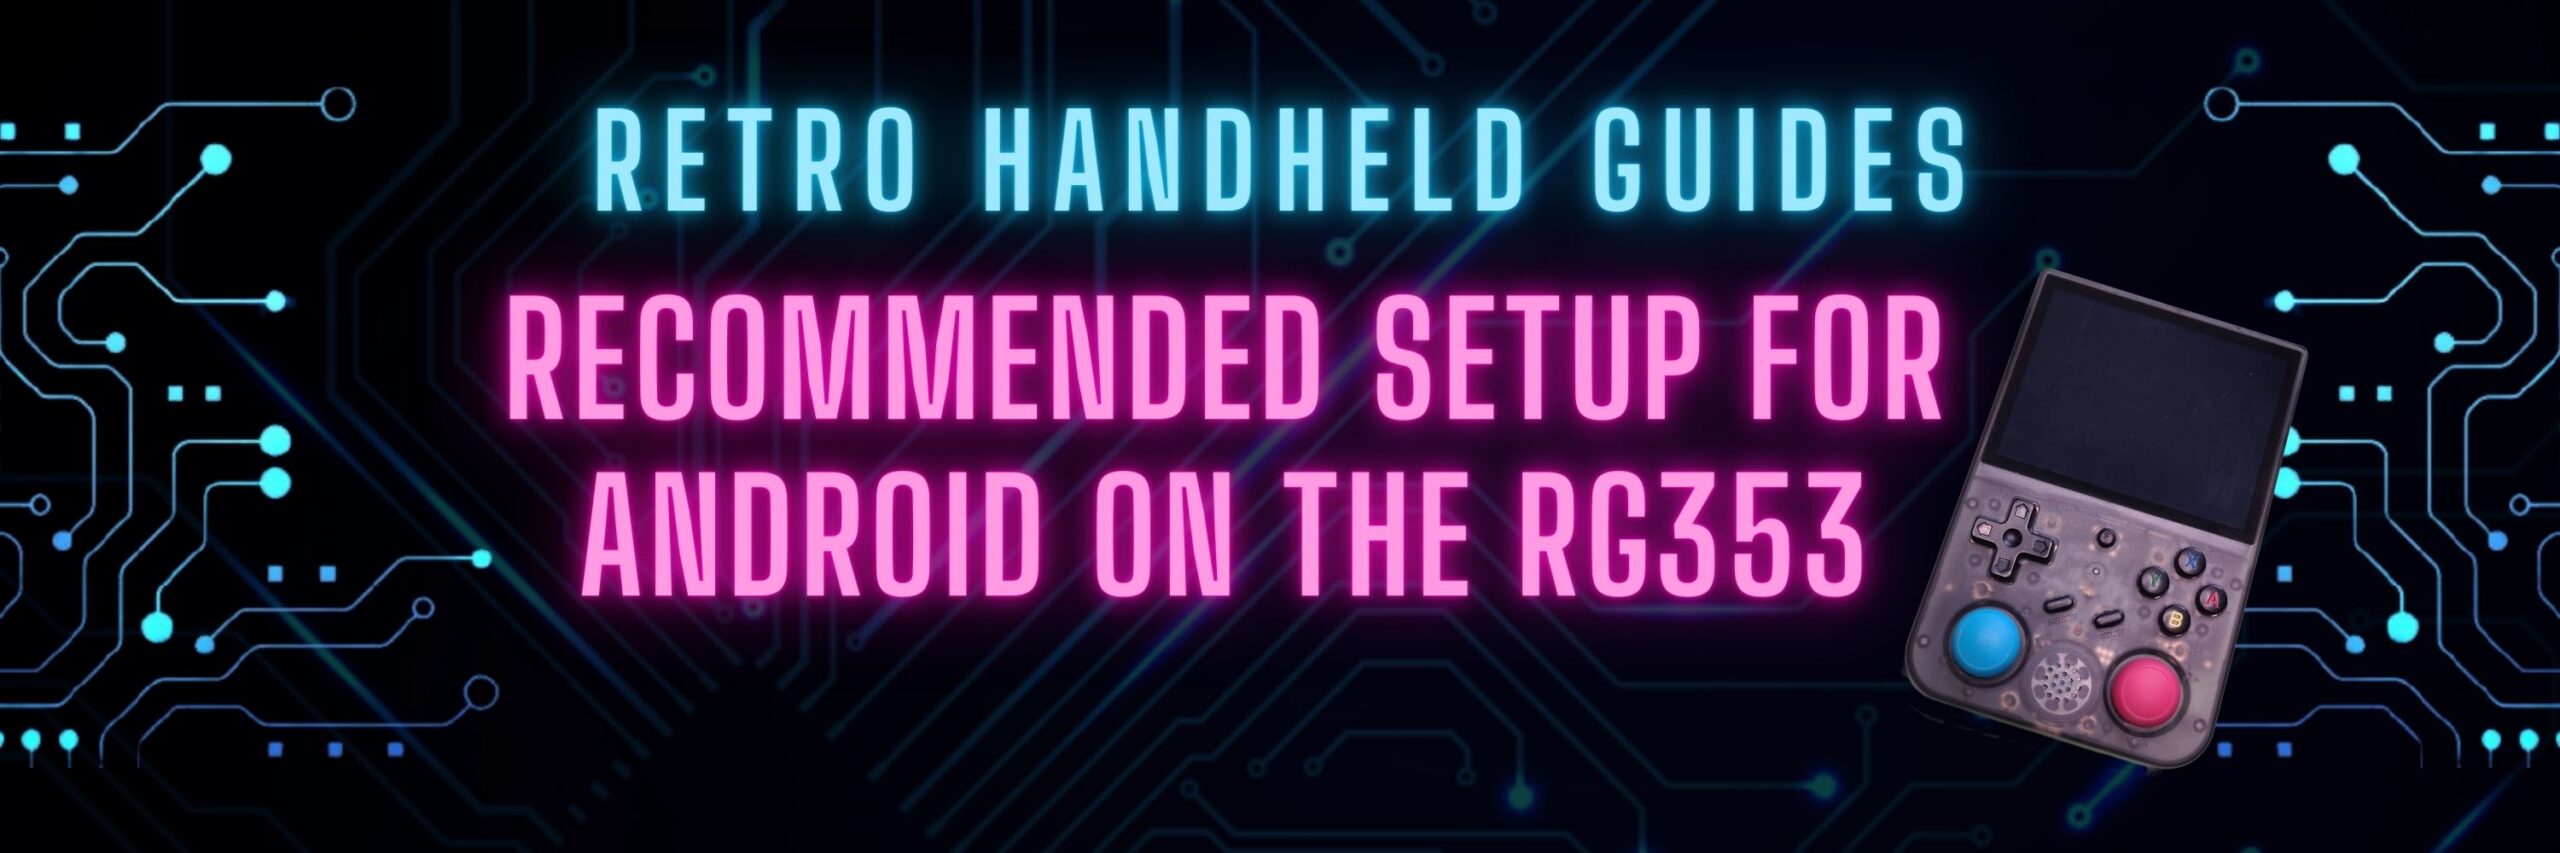 RG353 Recommended Android Setup Guide